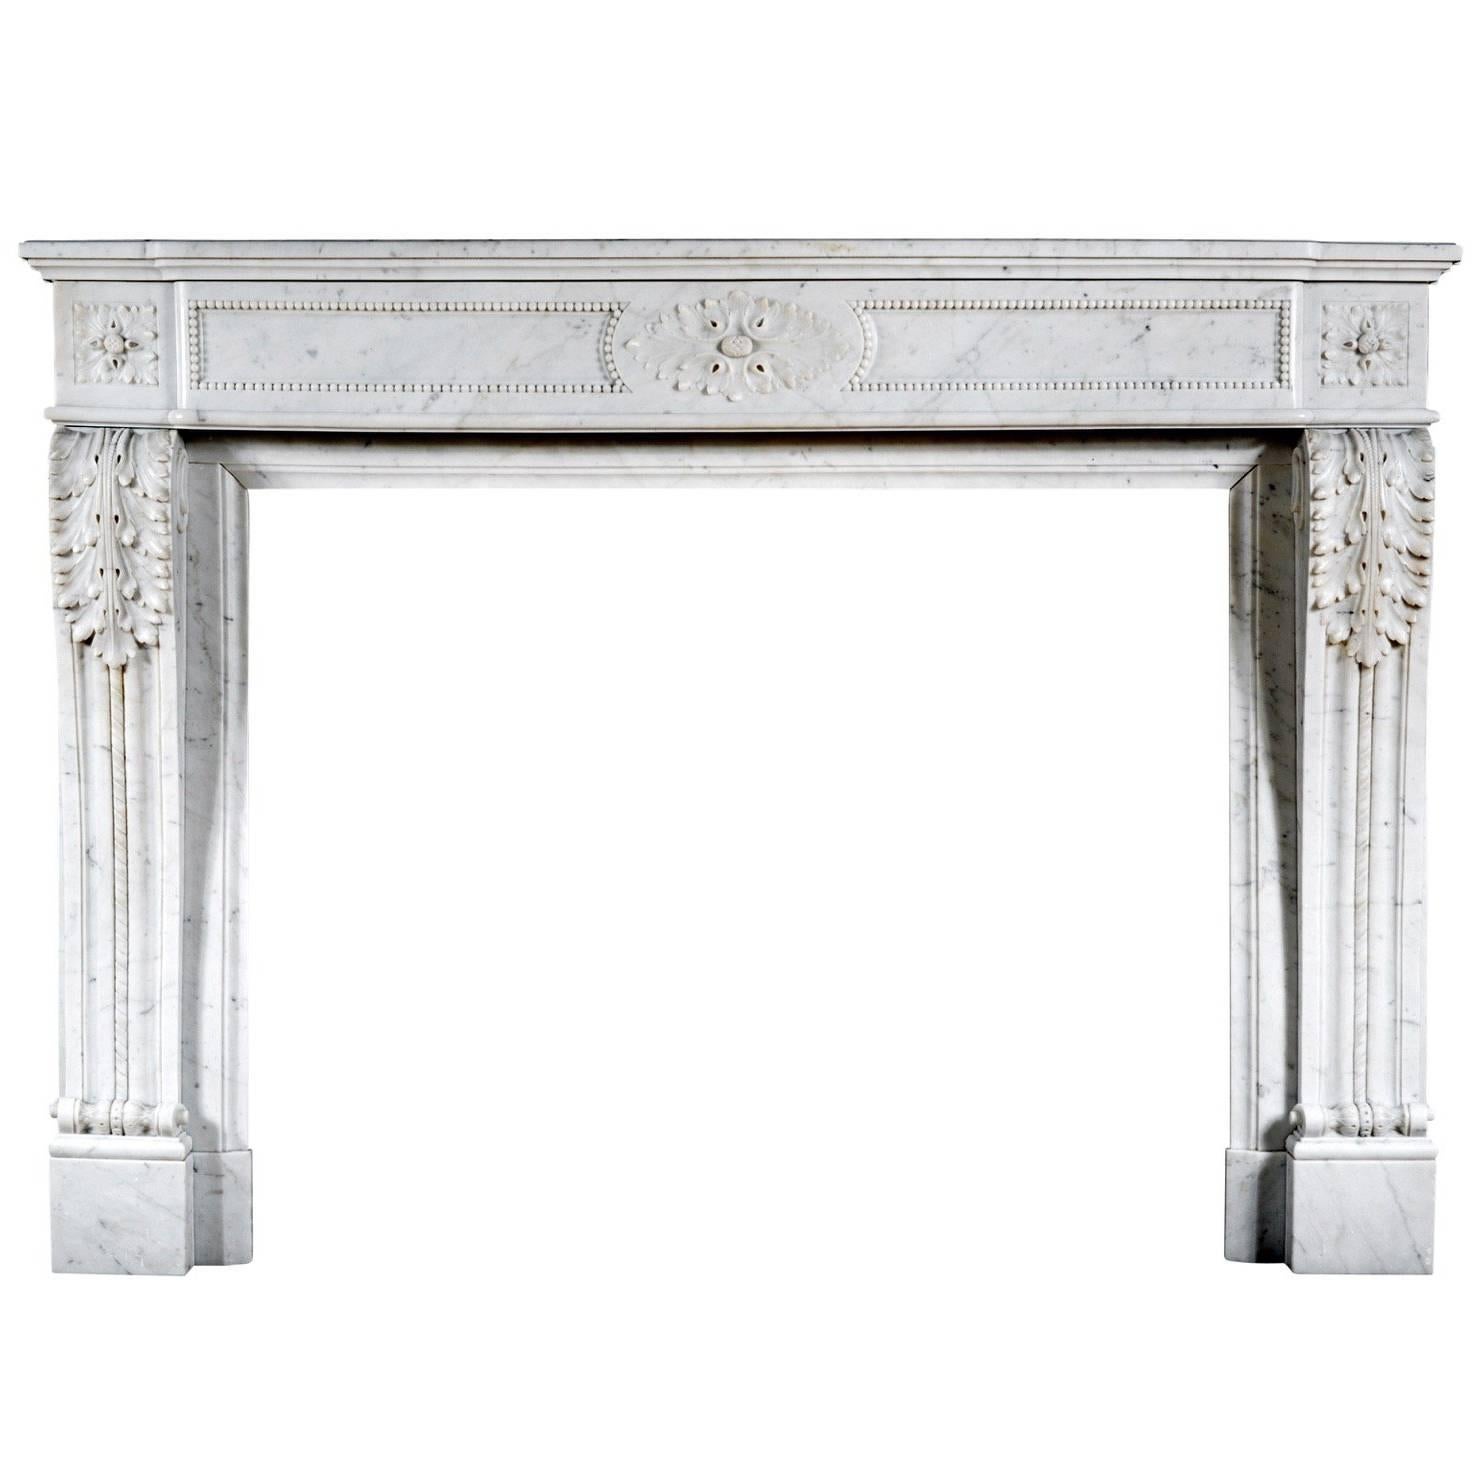 French Louis XVI Style Antique Fireplace in Carrara Marble